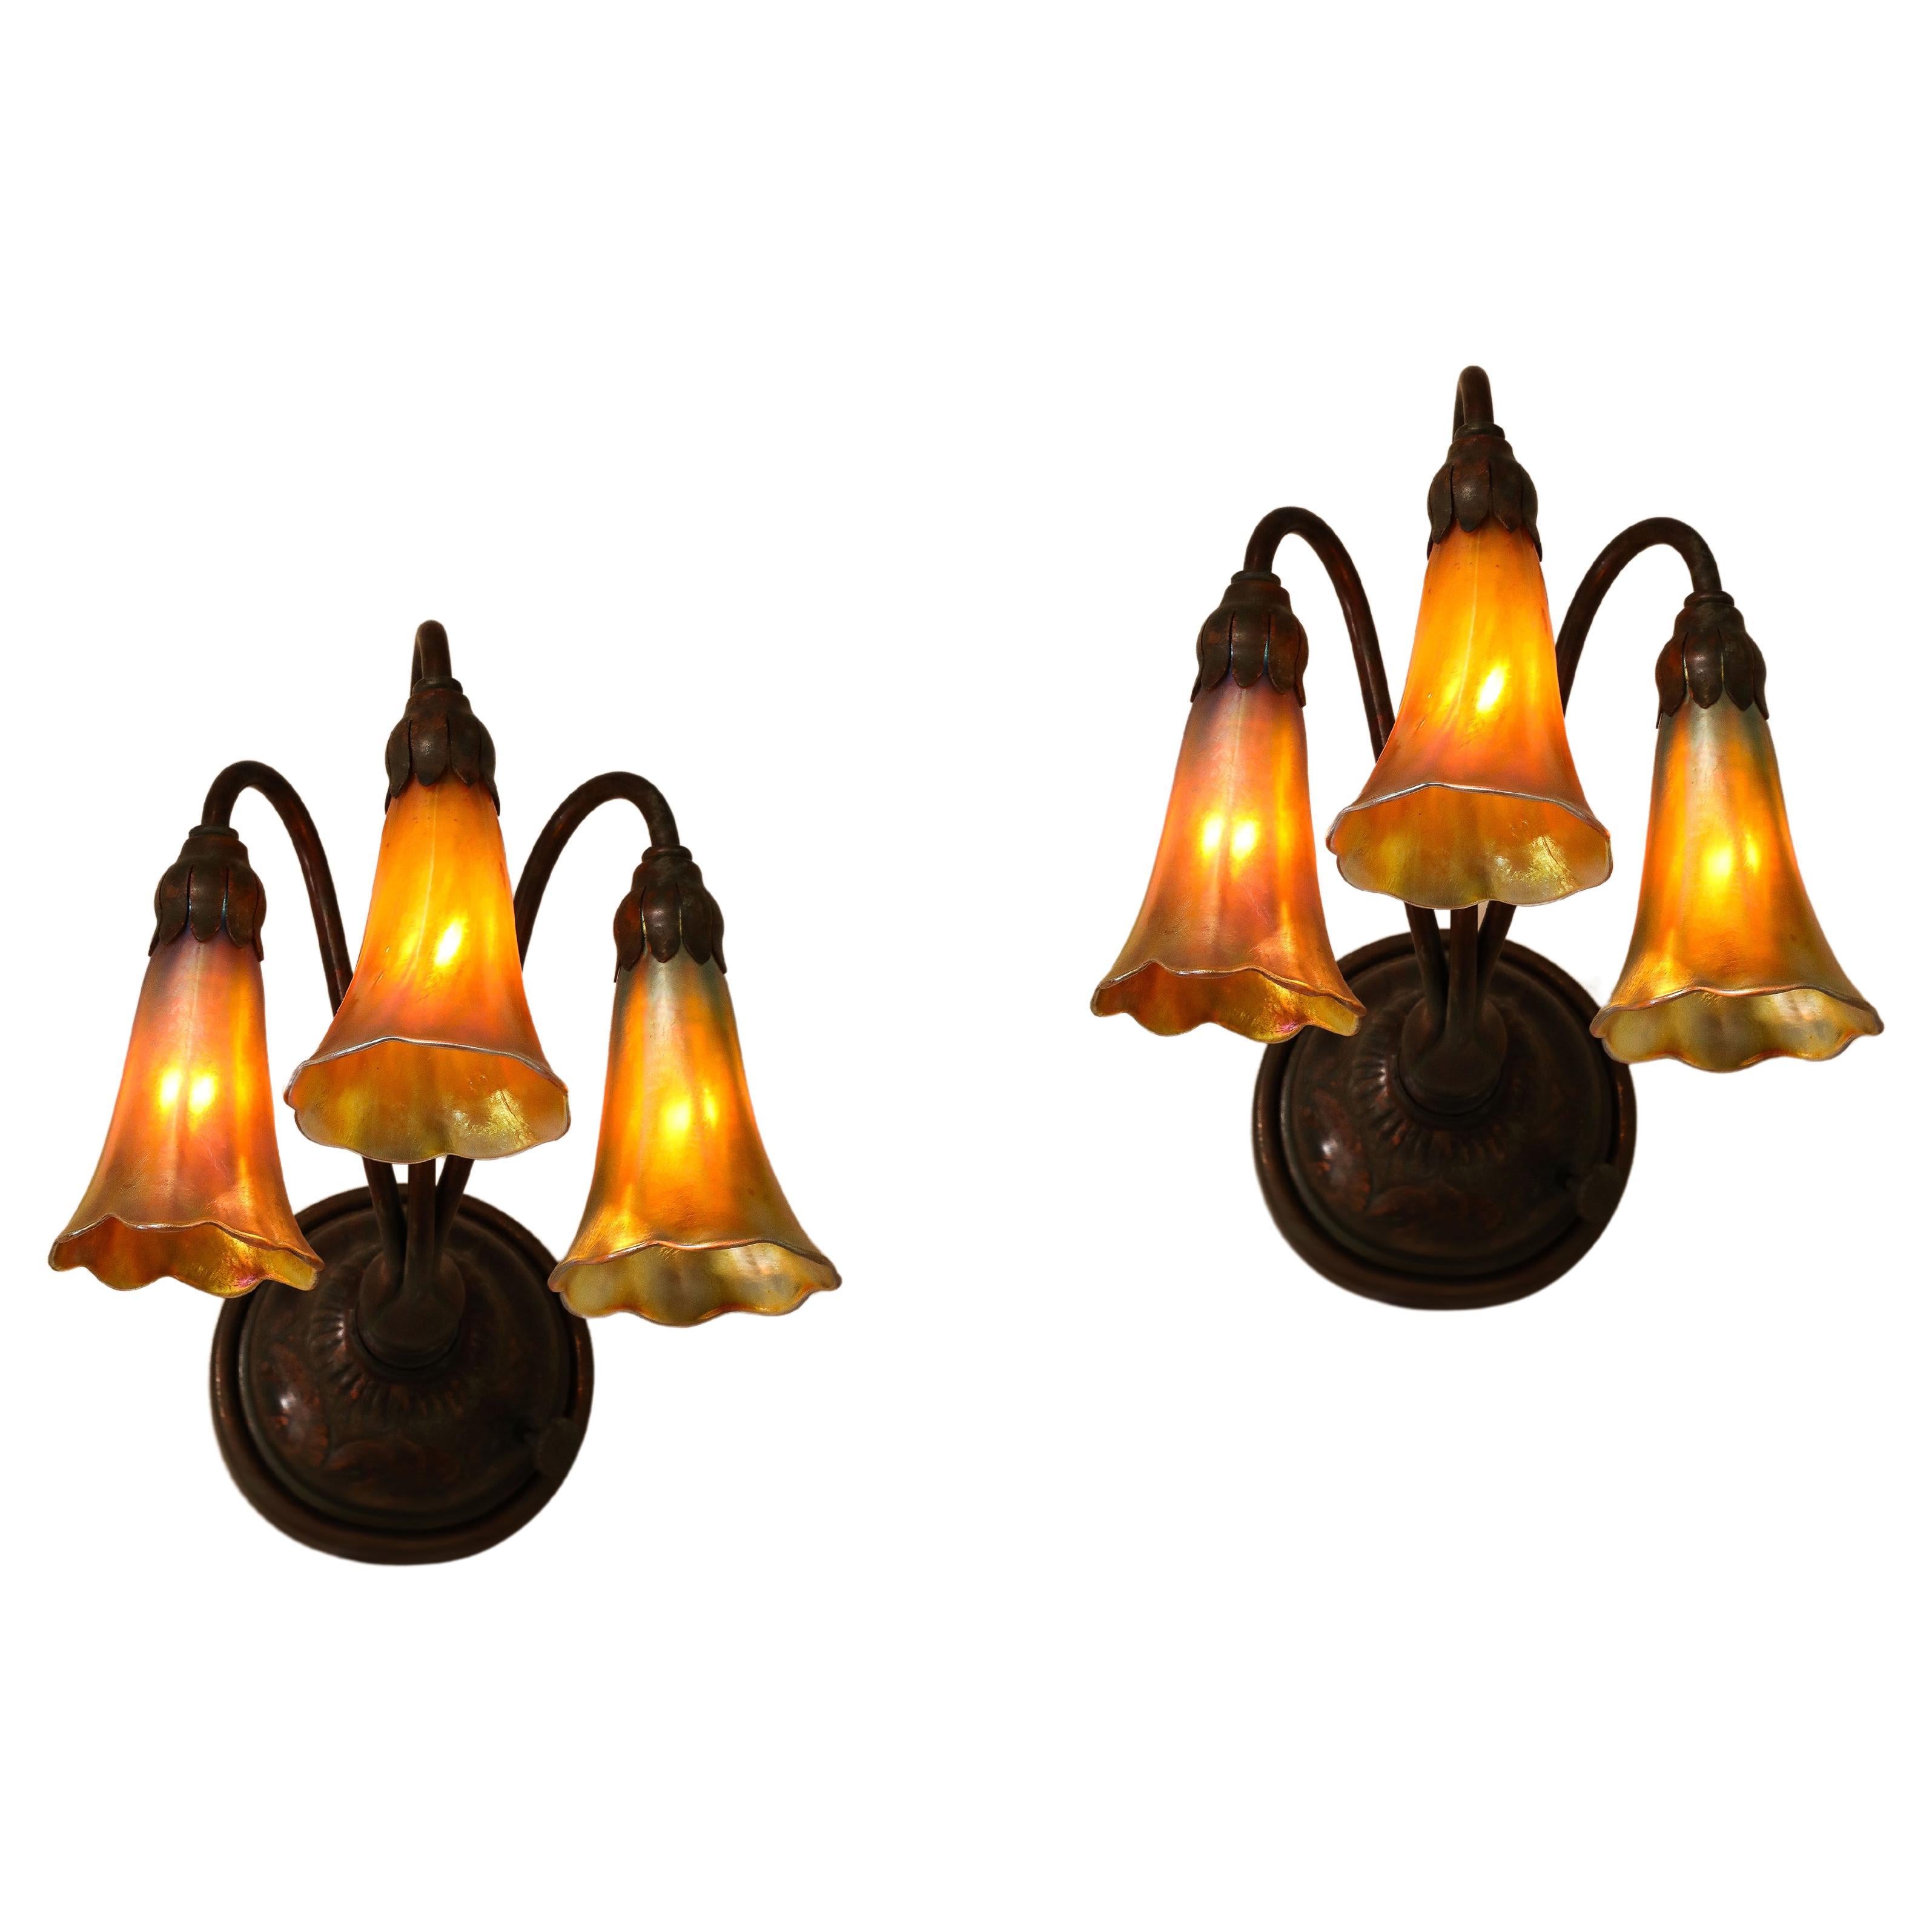 A Fine Pair of 3 Light Wall Sconces, by Tiffany Studios For Sale